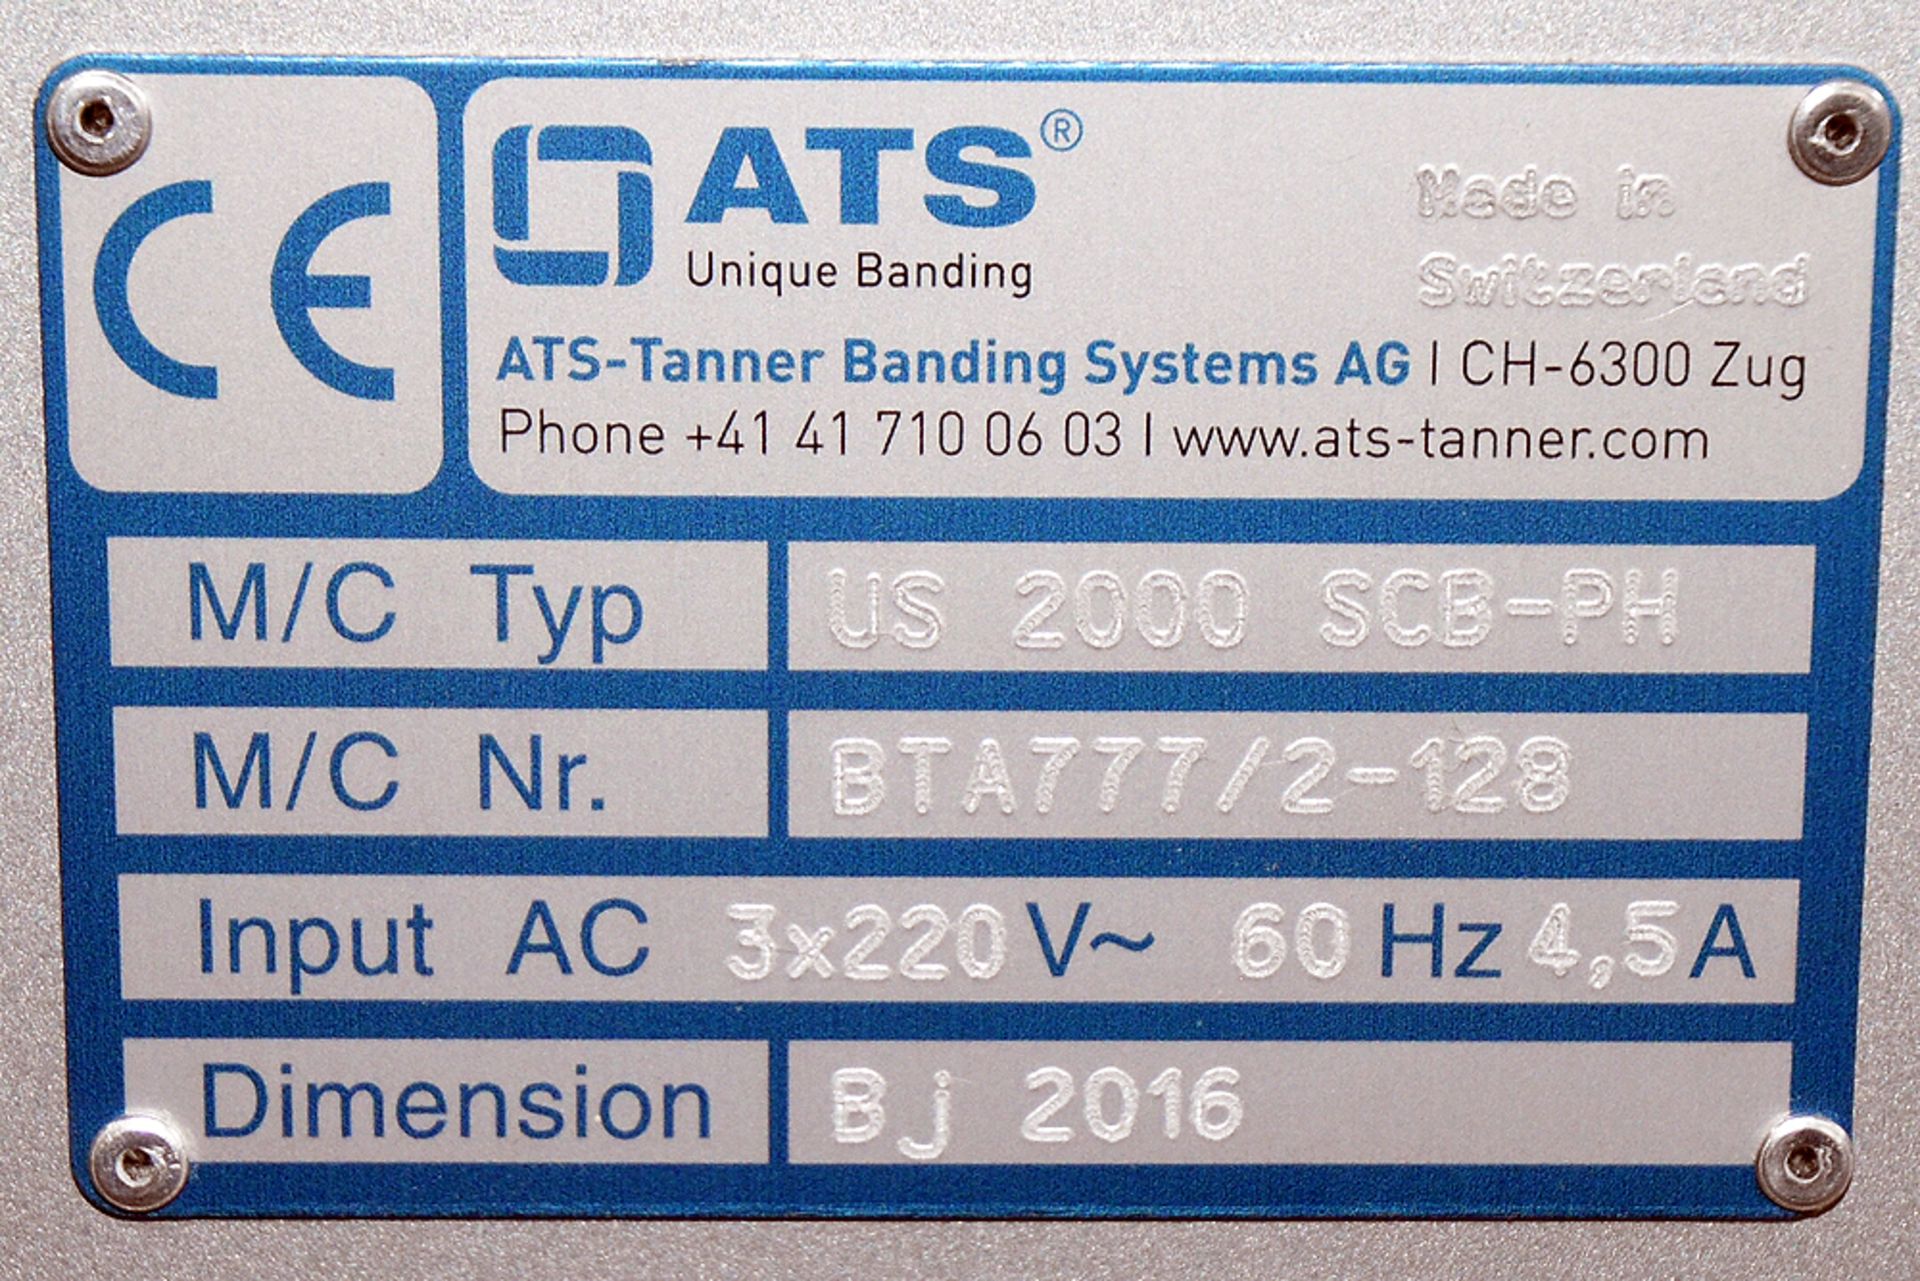 ATS US-2000 SCB-PH Horizontal and Vertical Stacking, Automatic, Banding System - Image 14 of 17